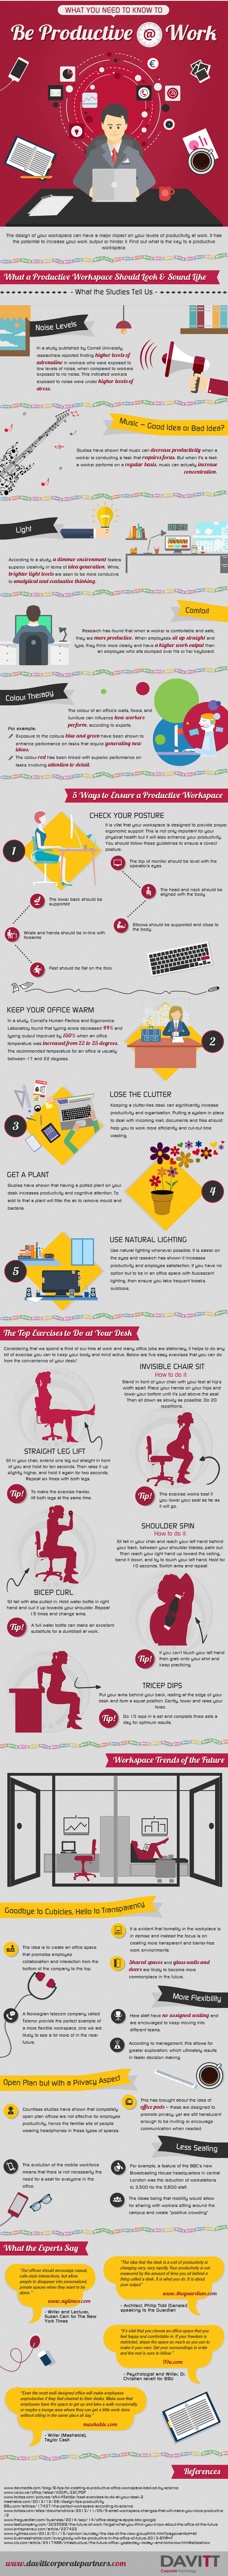 Infographic-What-You-Need-to-Know-to-Be-Productive-at-Work